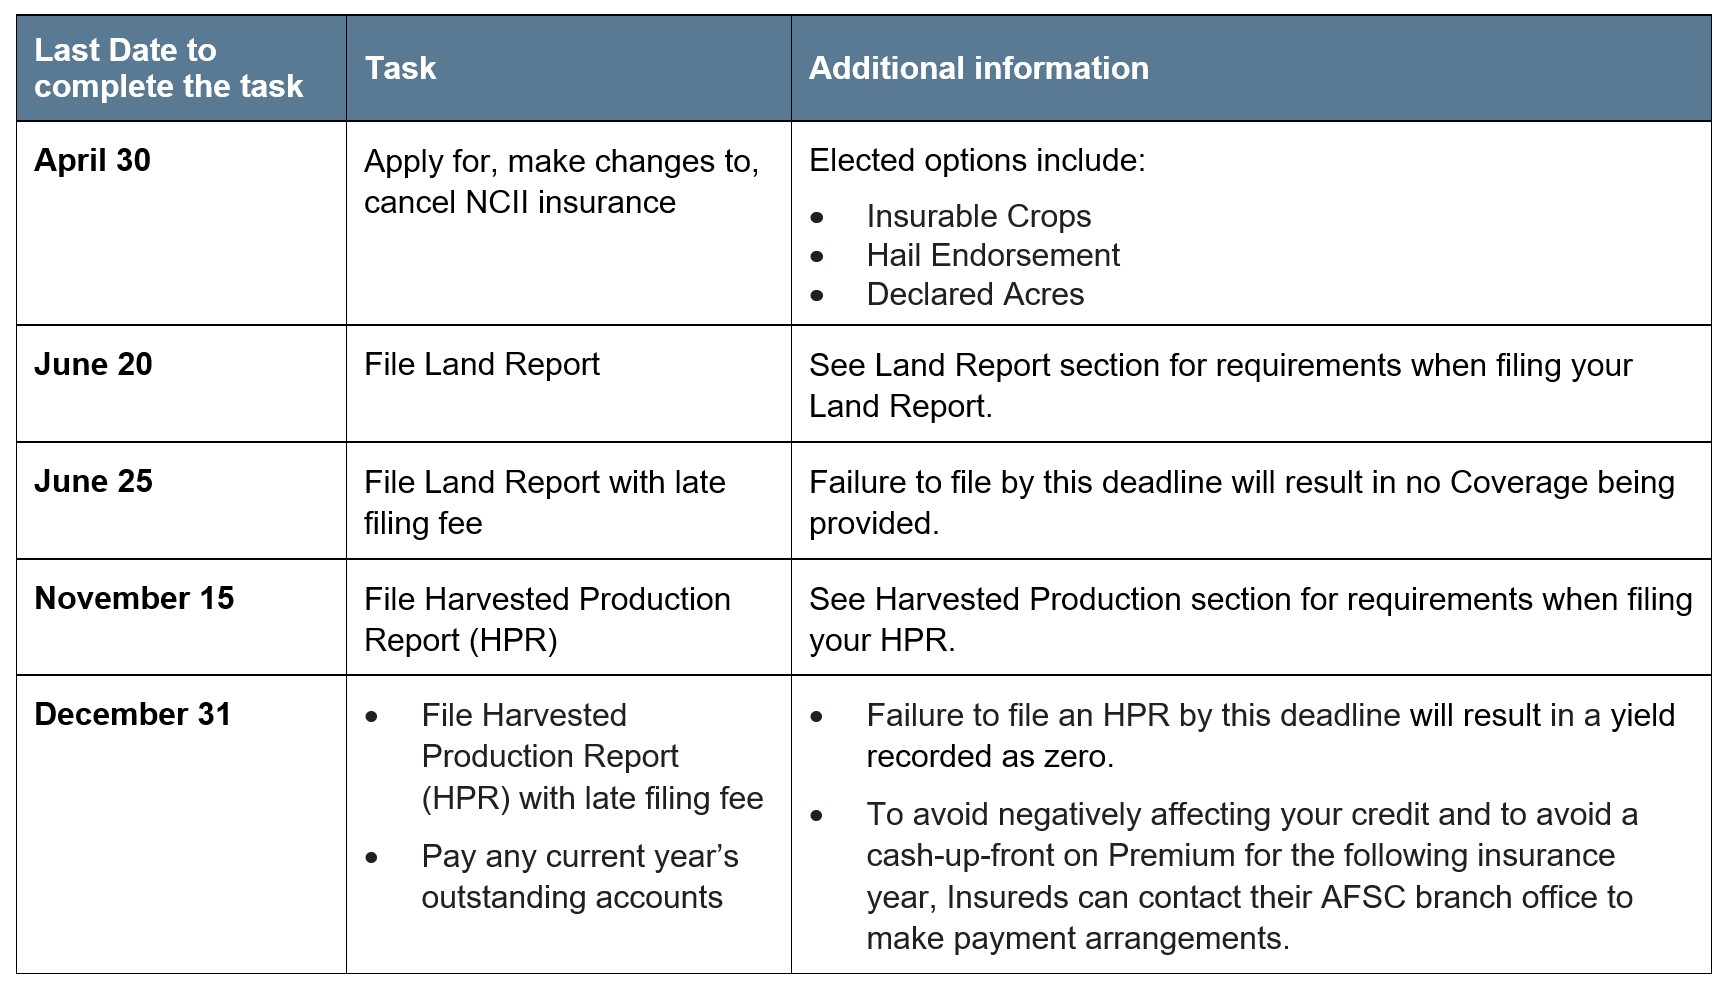 New Crop Insurance Initiative Article 4 Reporting Deadlines. Call AFSC for details